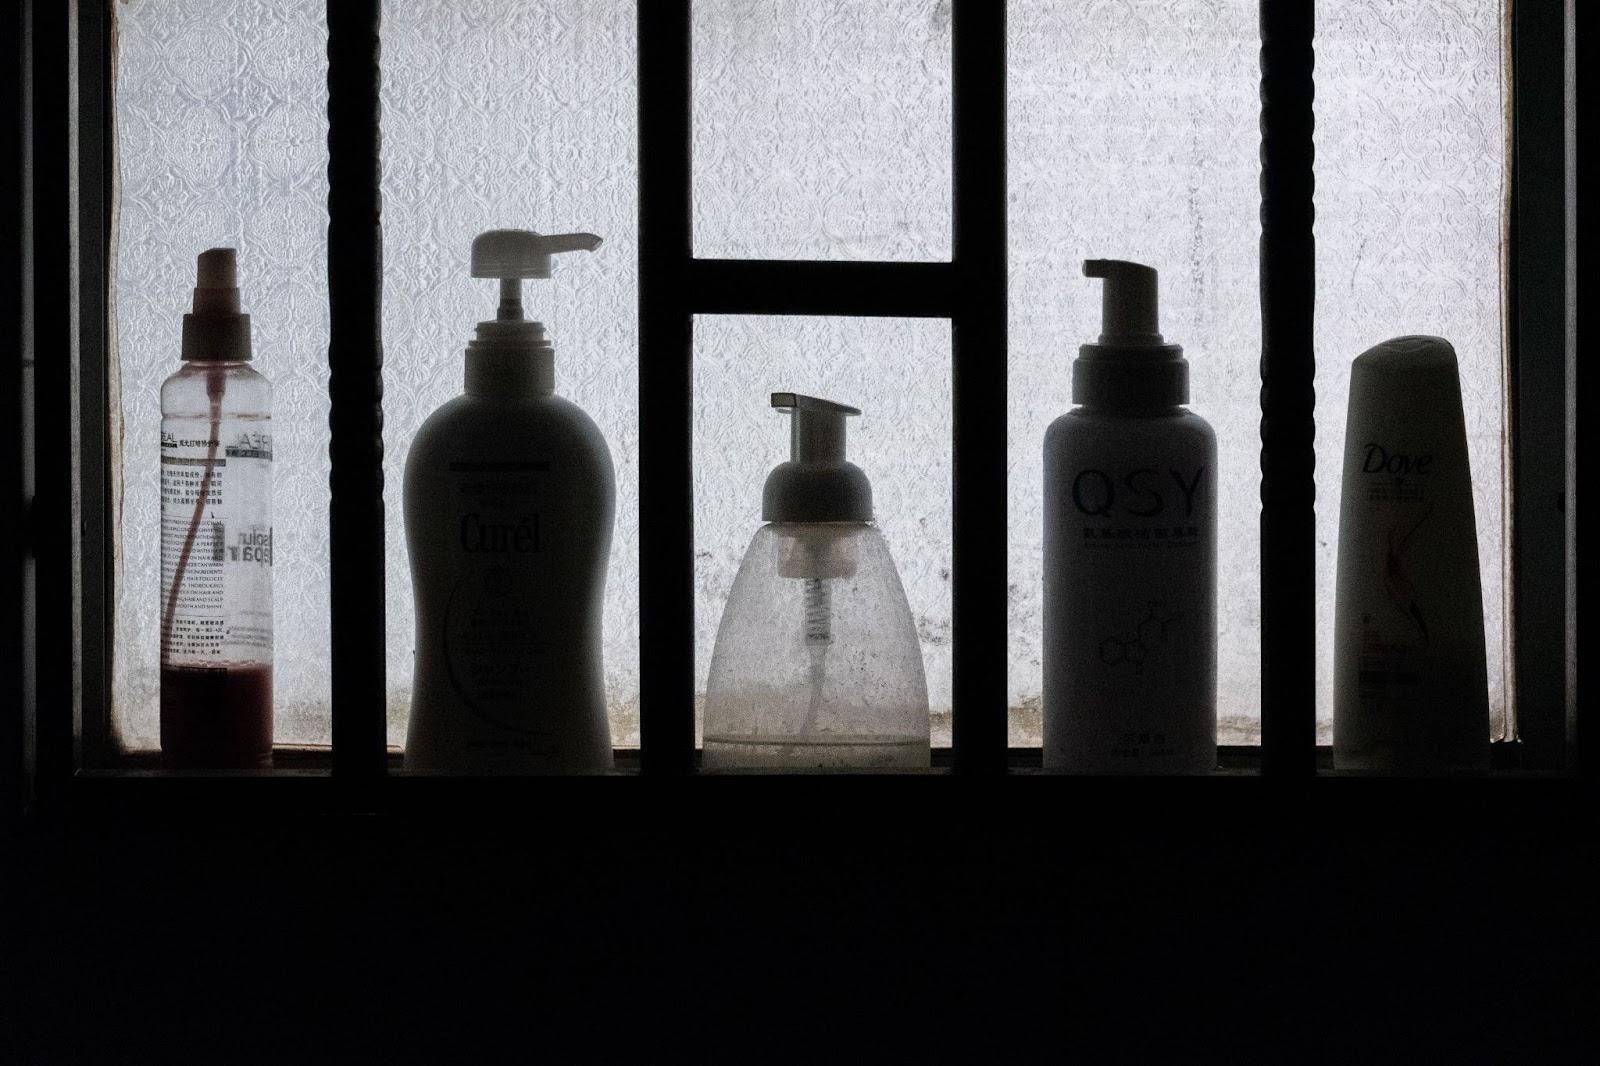 toiletries lined up in front of a window